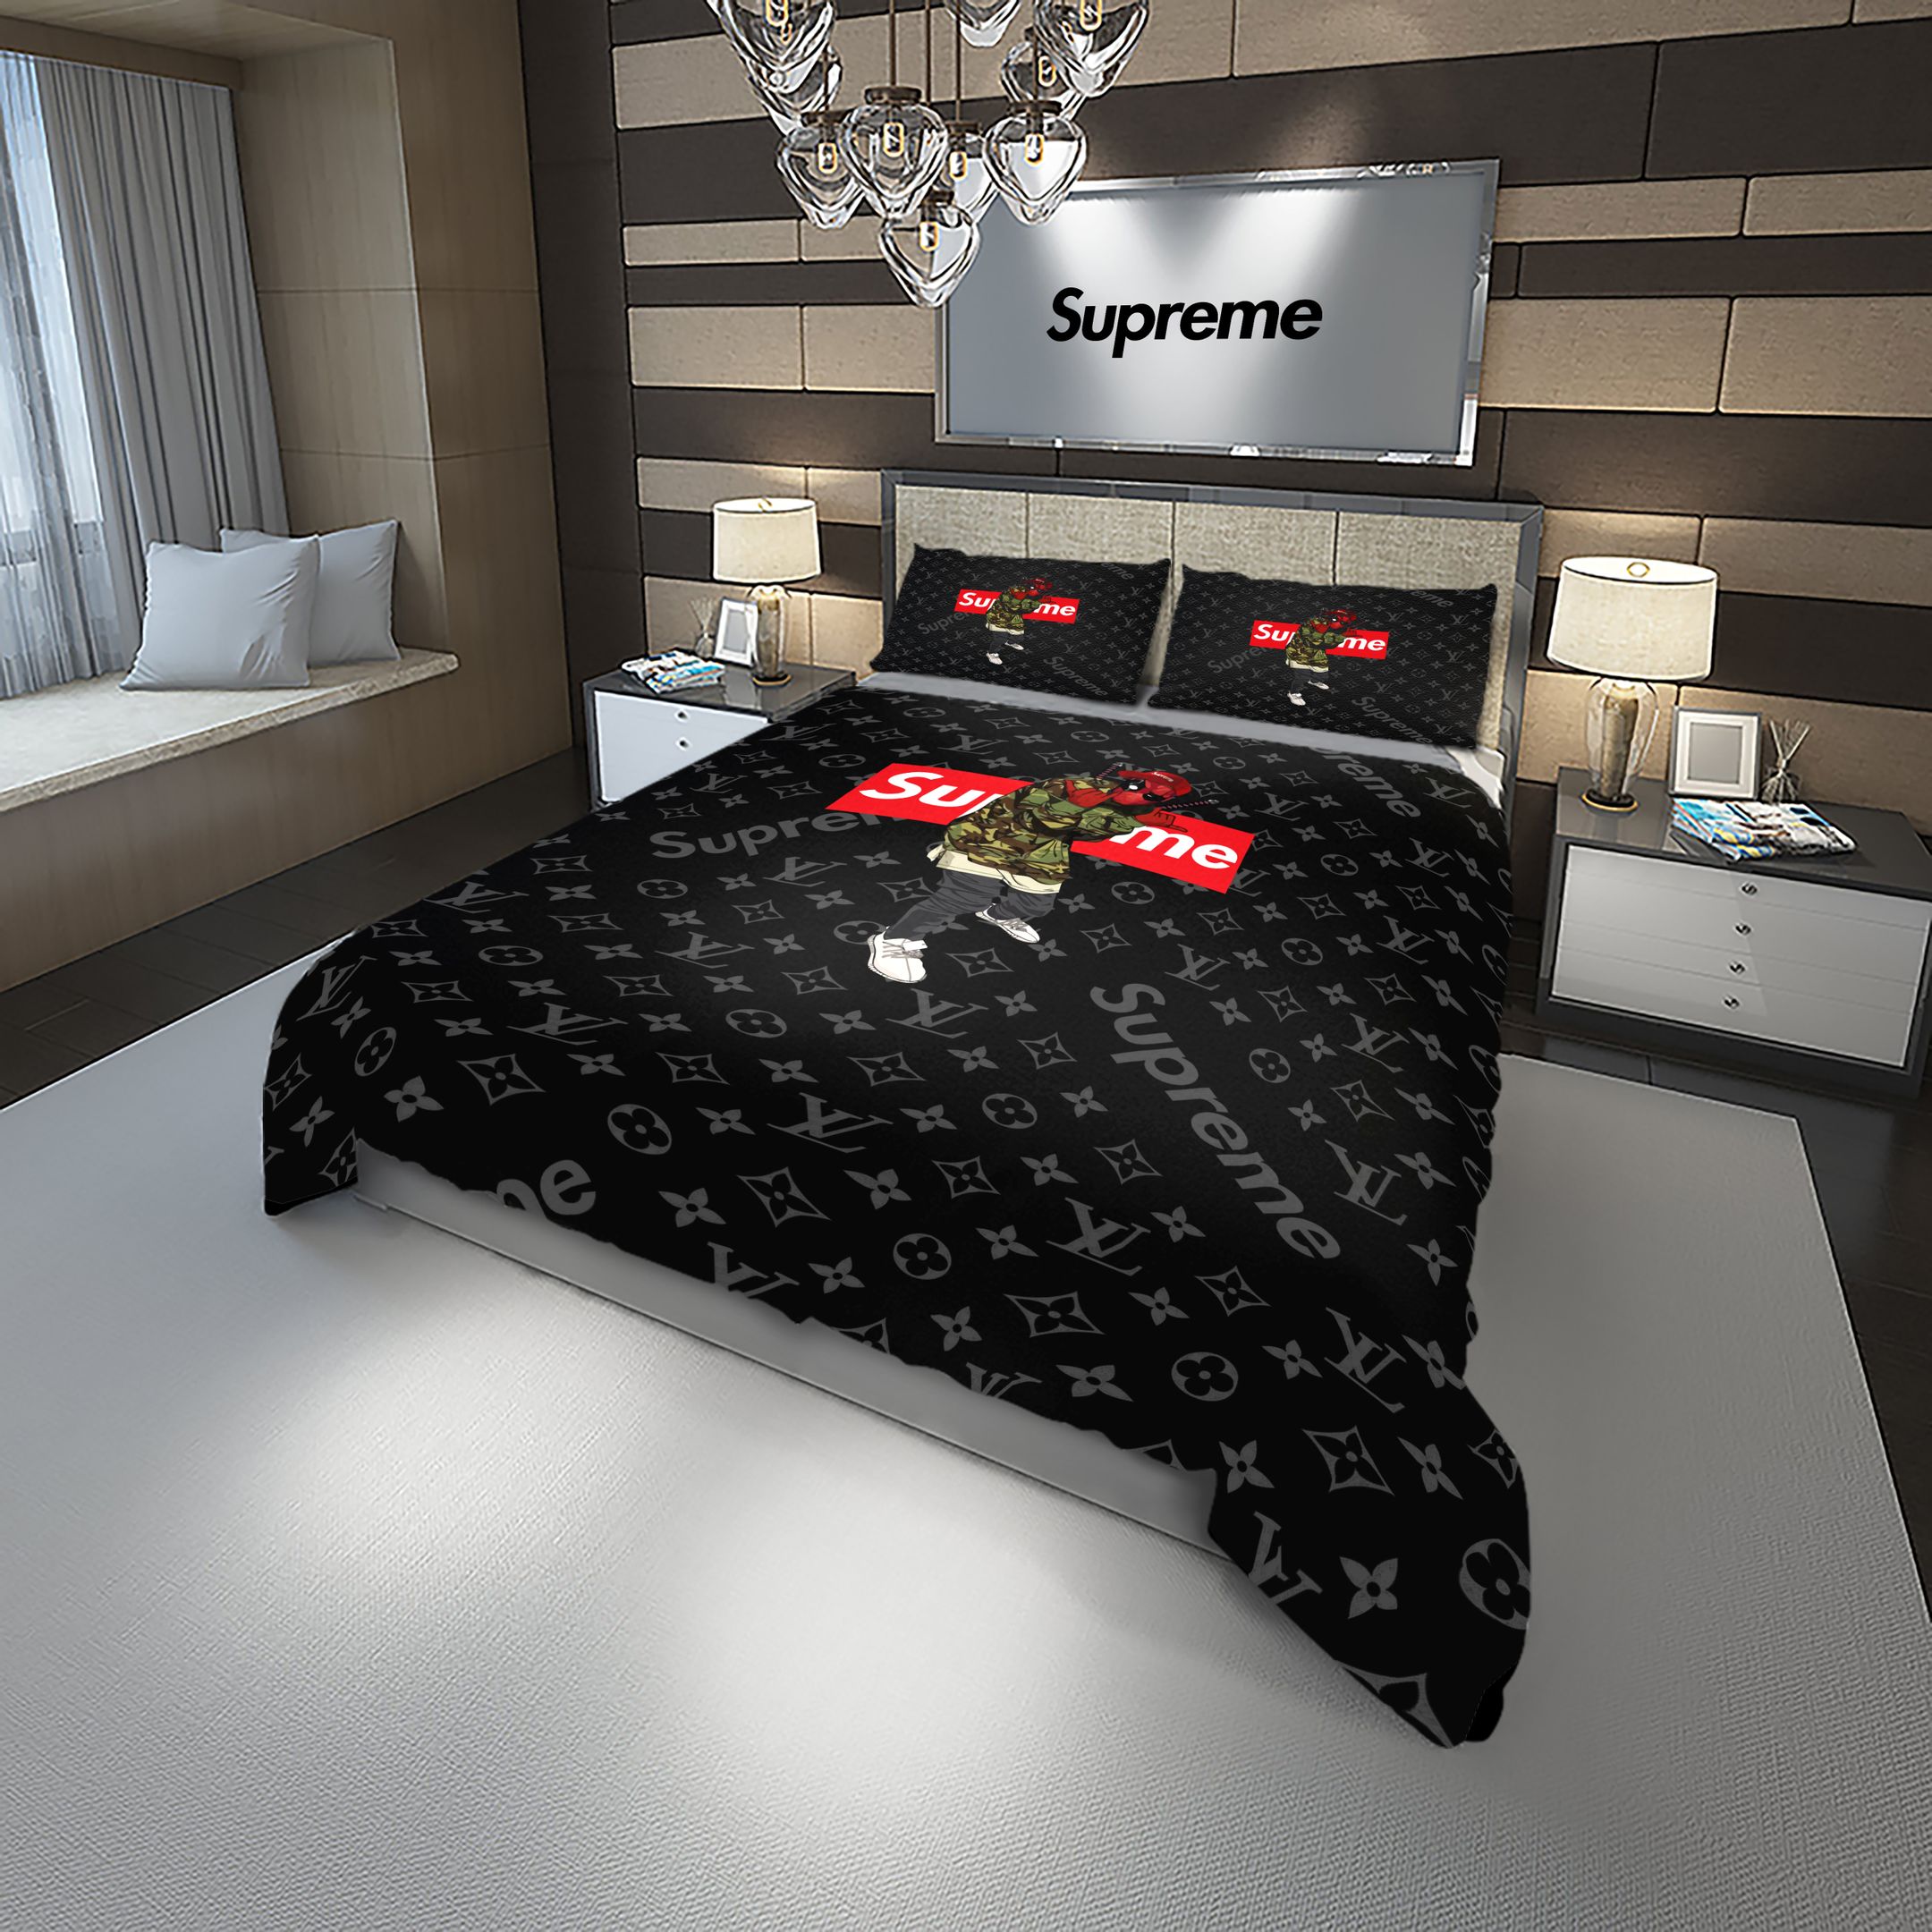 Let me show you about some luxury brand bedding set 2022 57